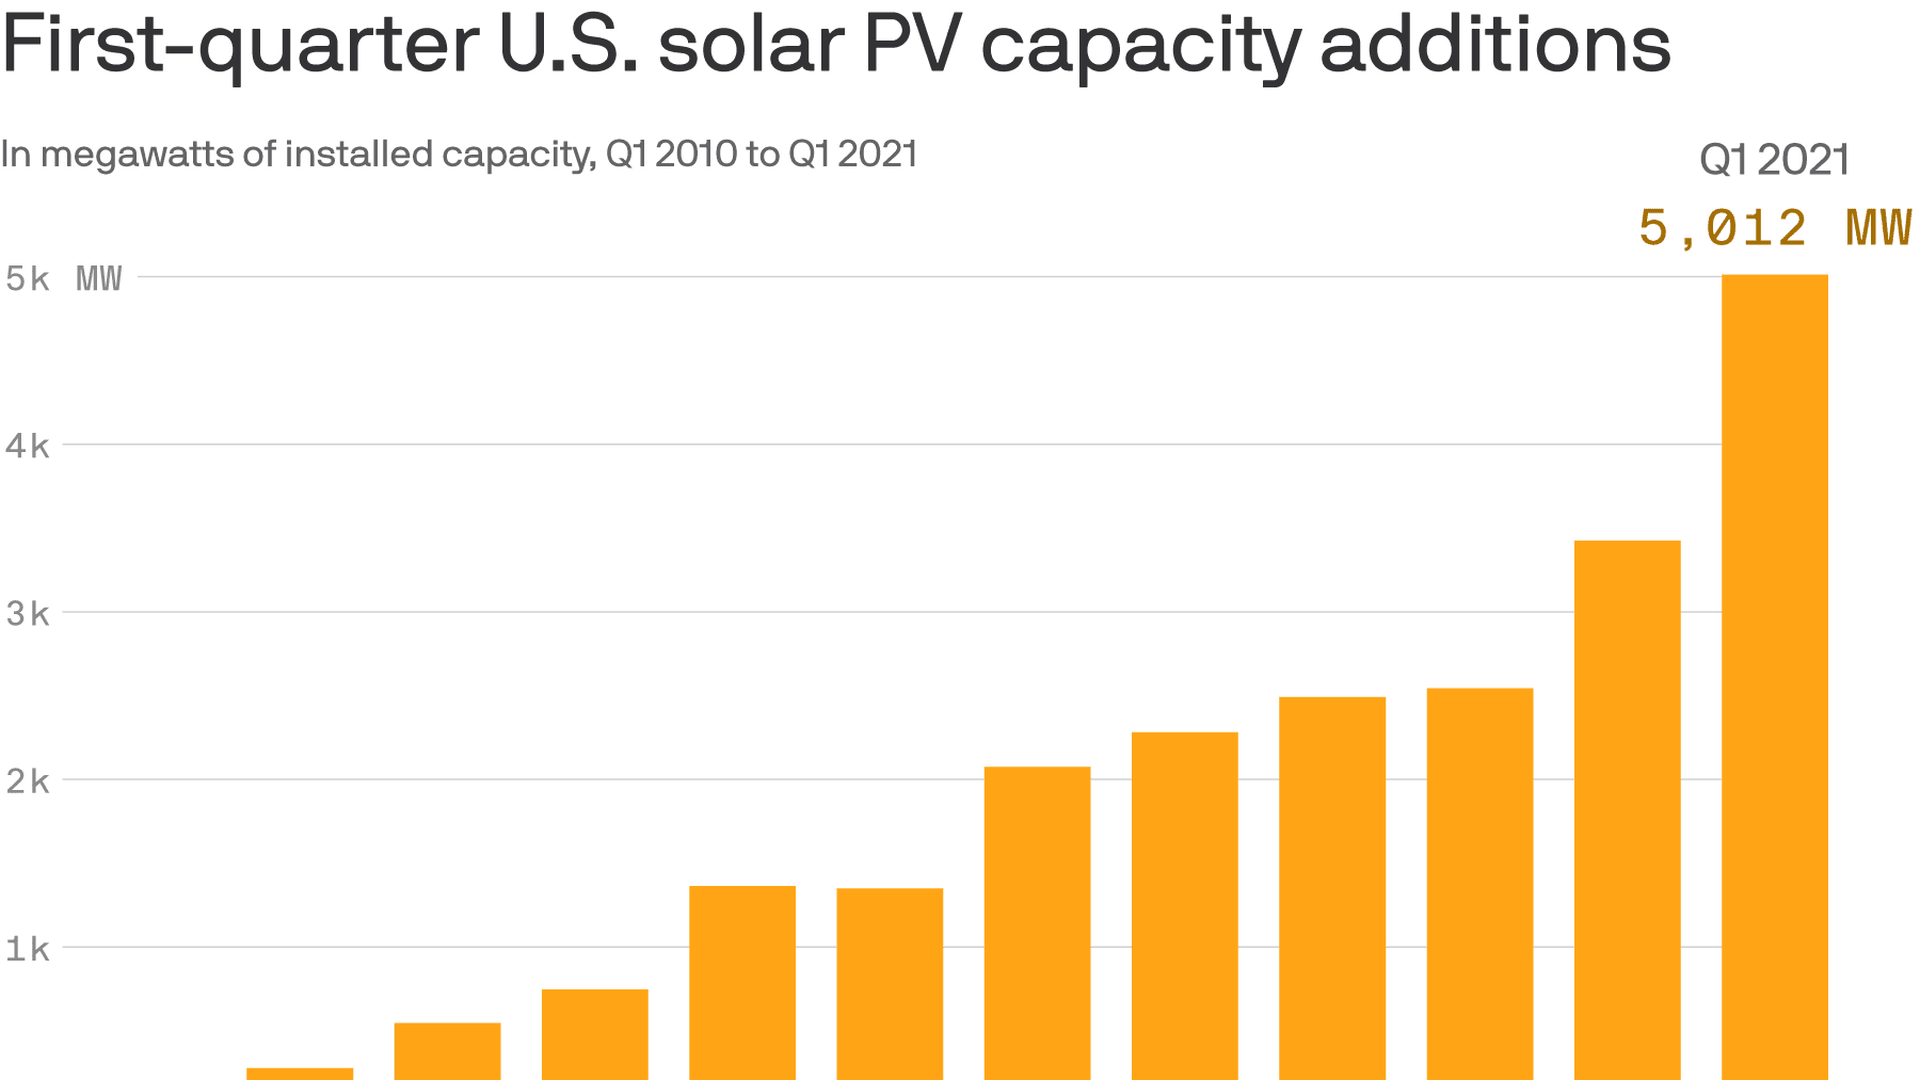 Graph showing U.S. solar PV capacity additions. 